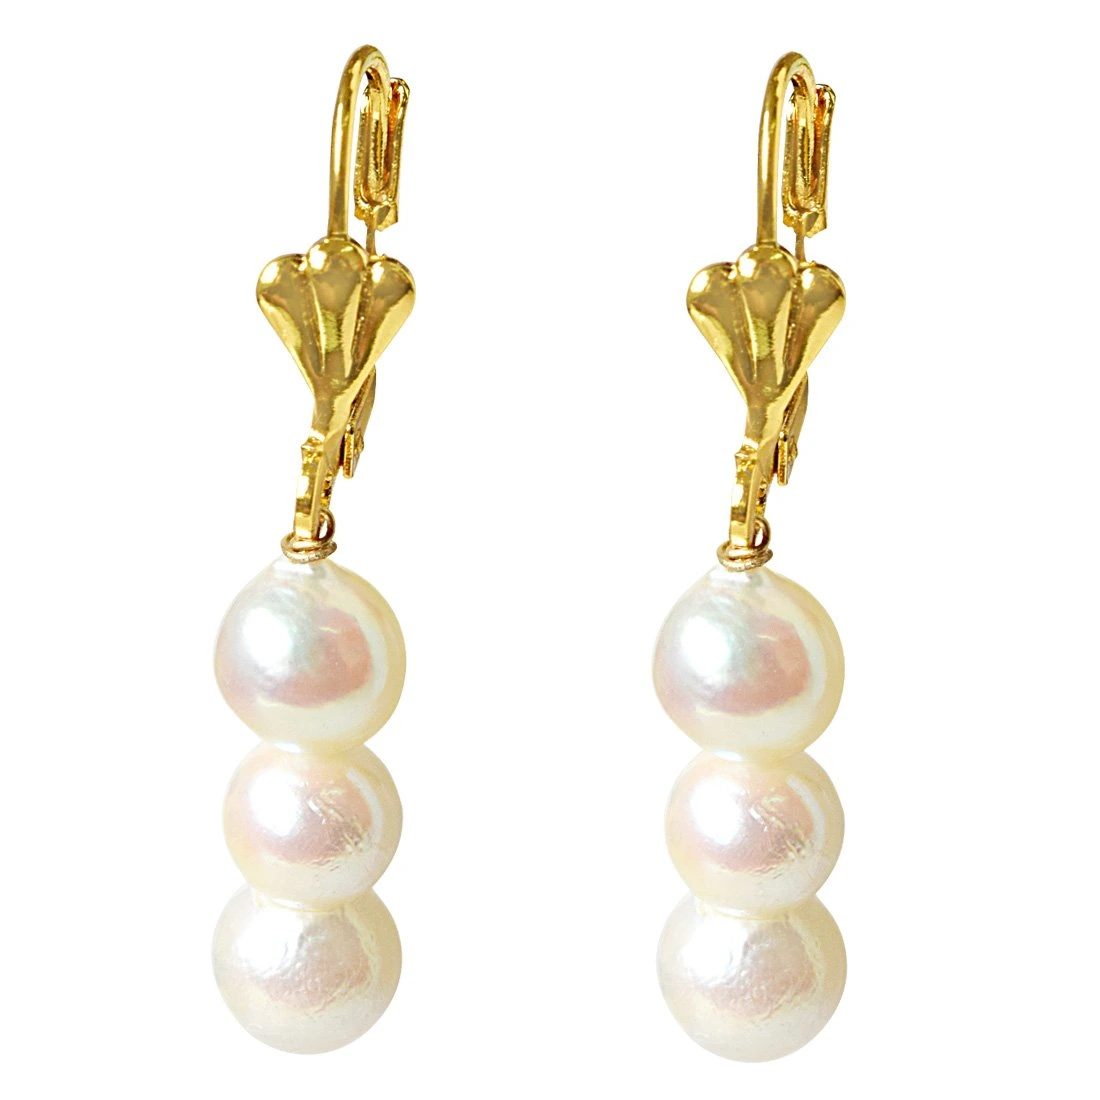 Real Natural Cultured Pearl and Flower Shaped Gold Plated Hanging Earrings for Women (SE331)